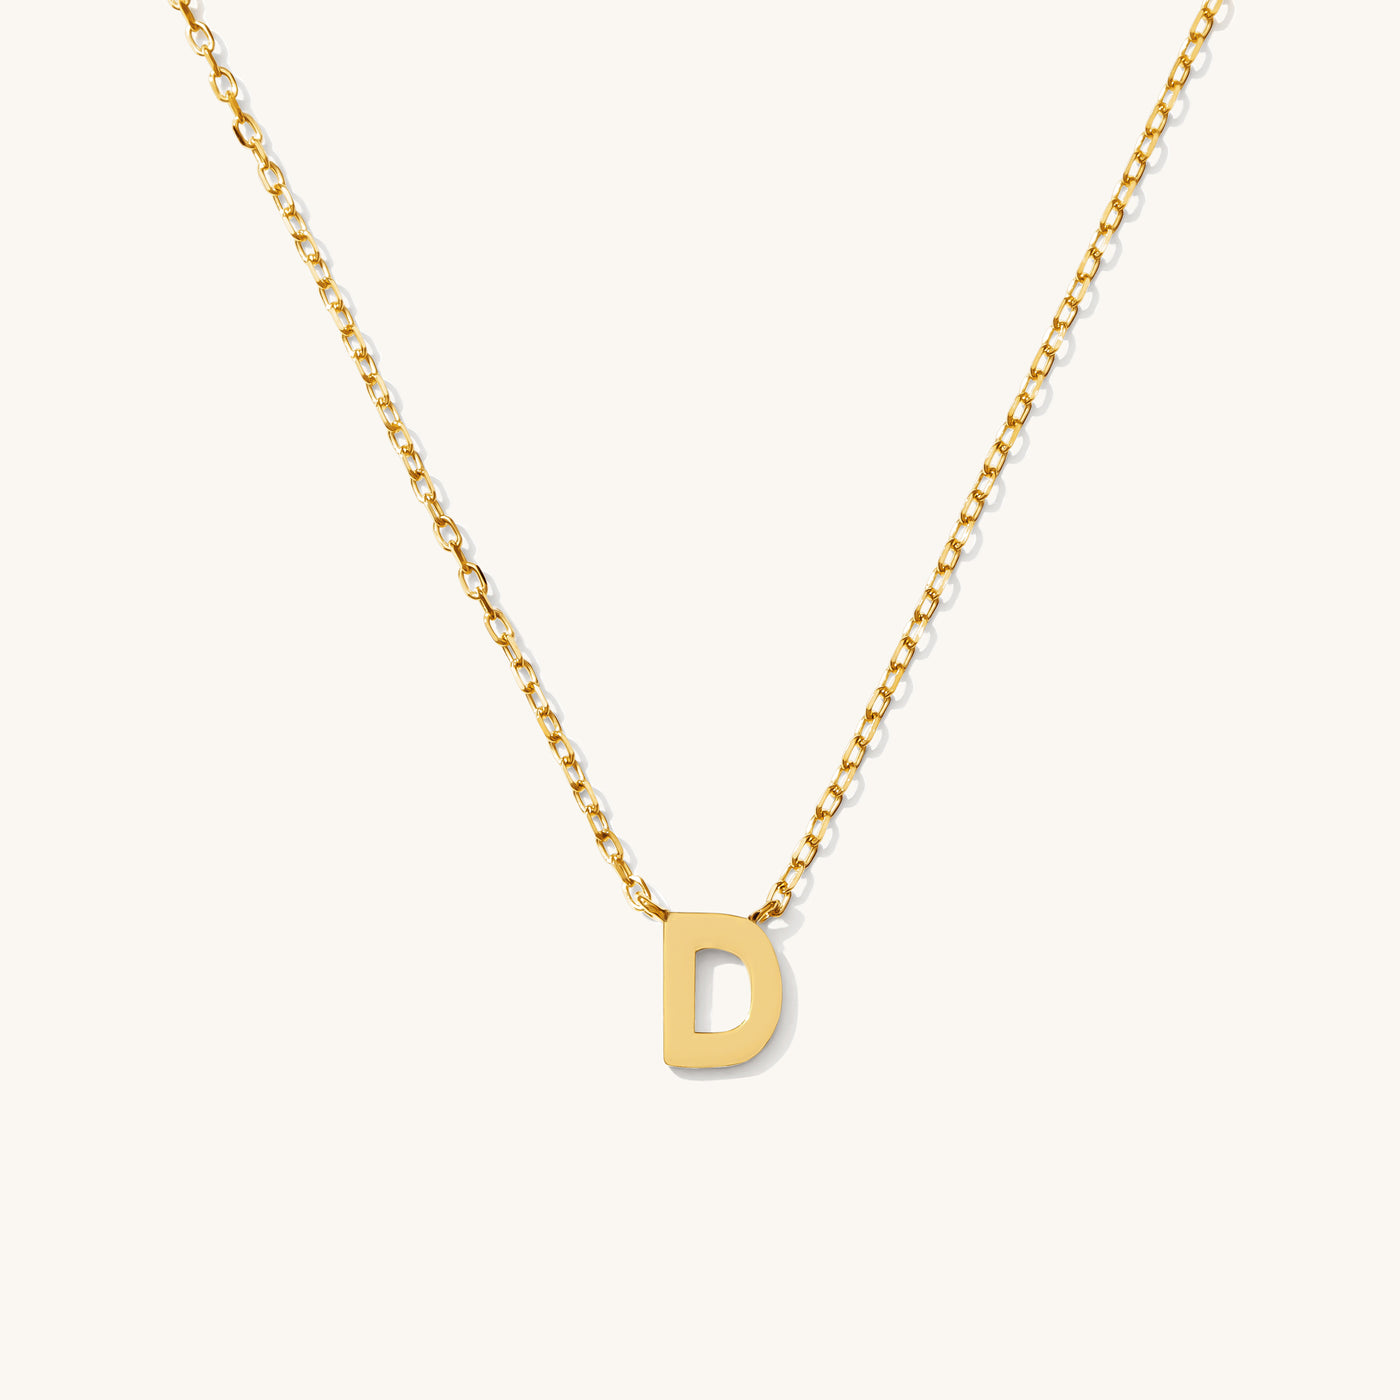 D Tiny Initial Necklace - 14k Solid Gold